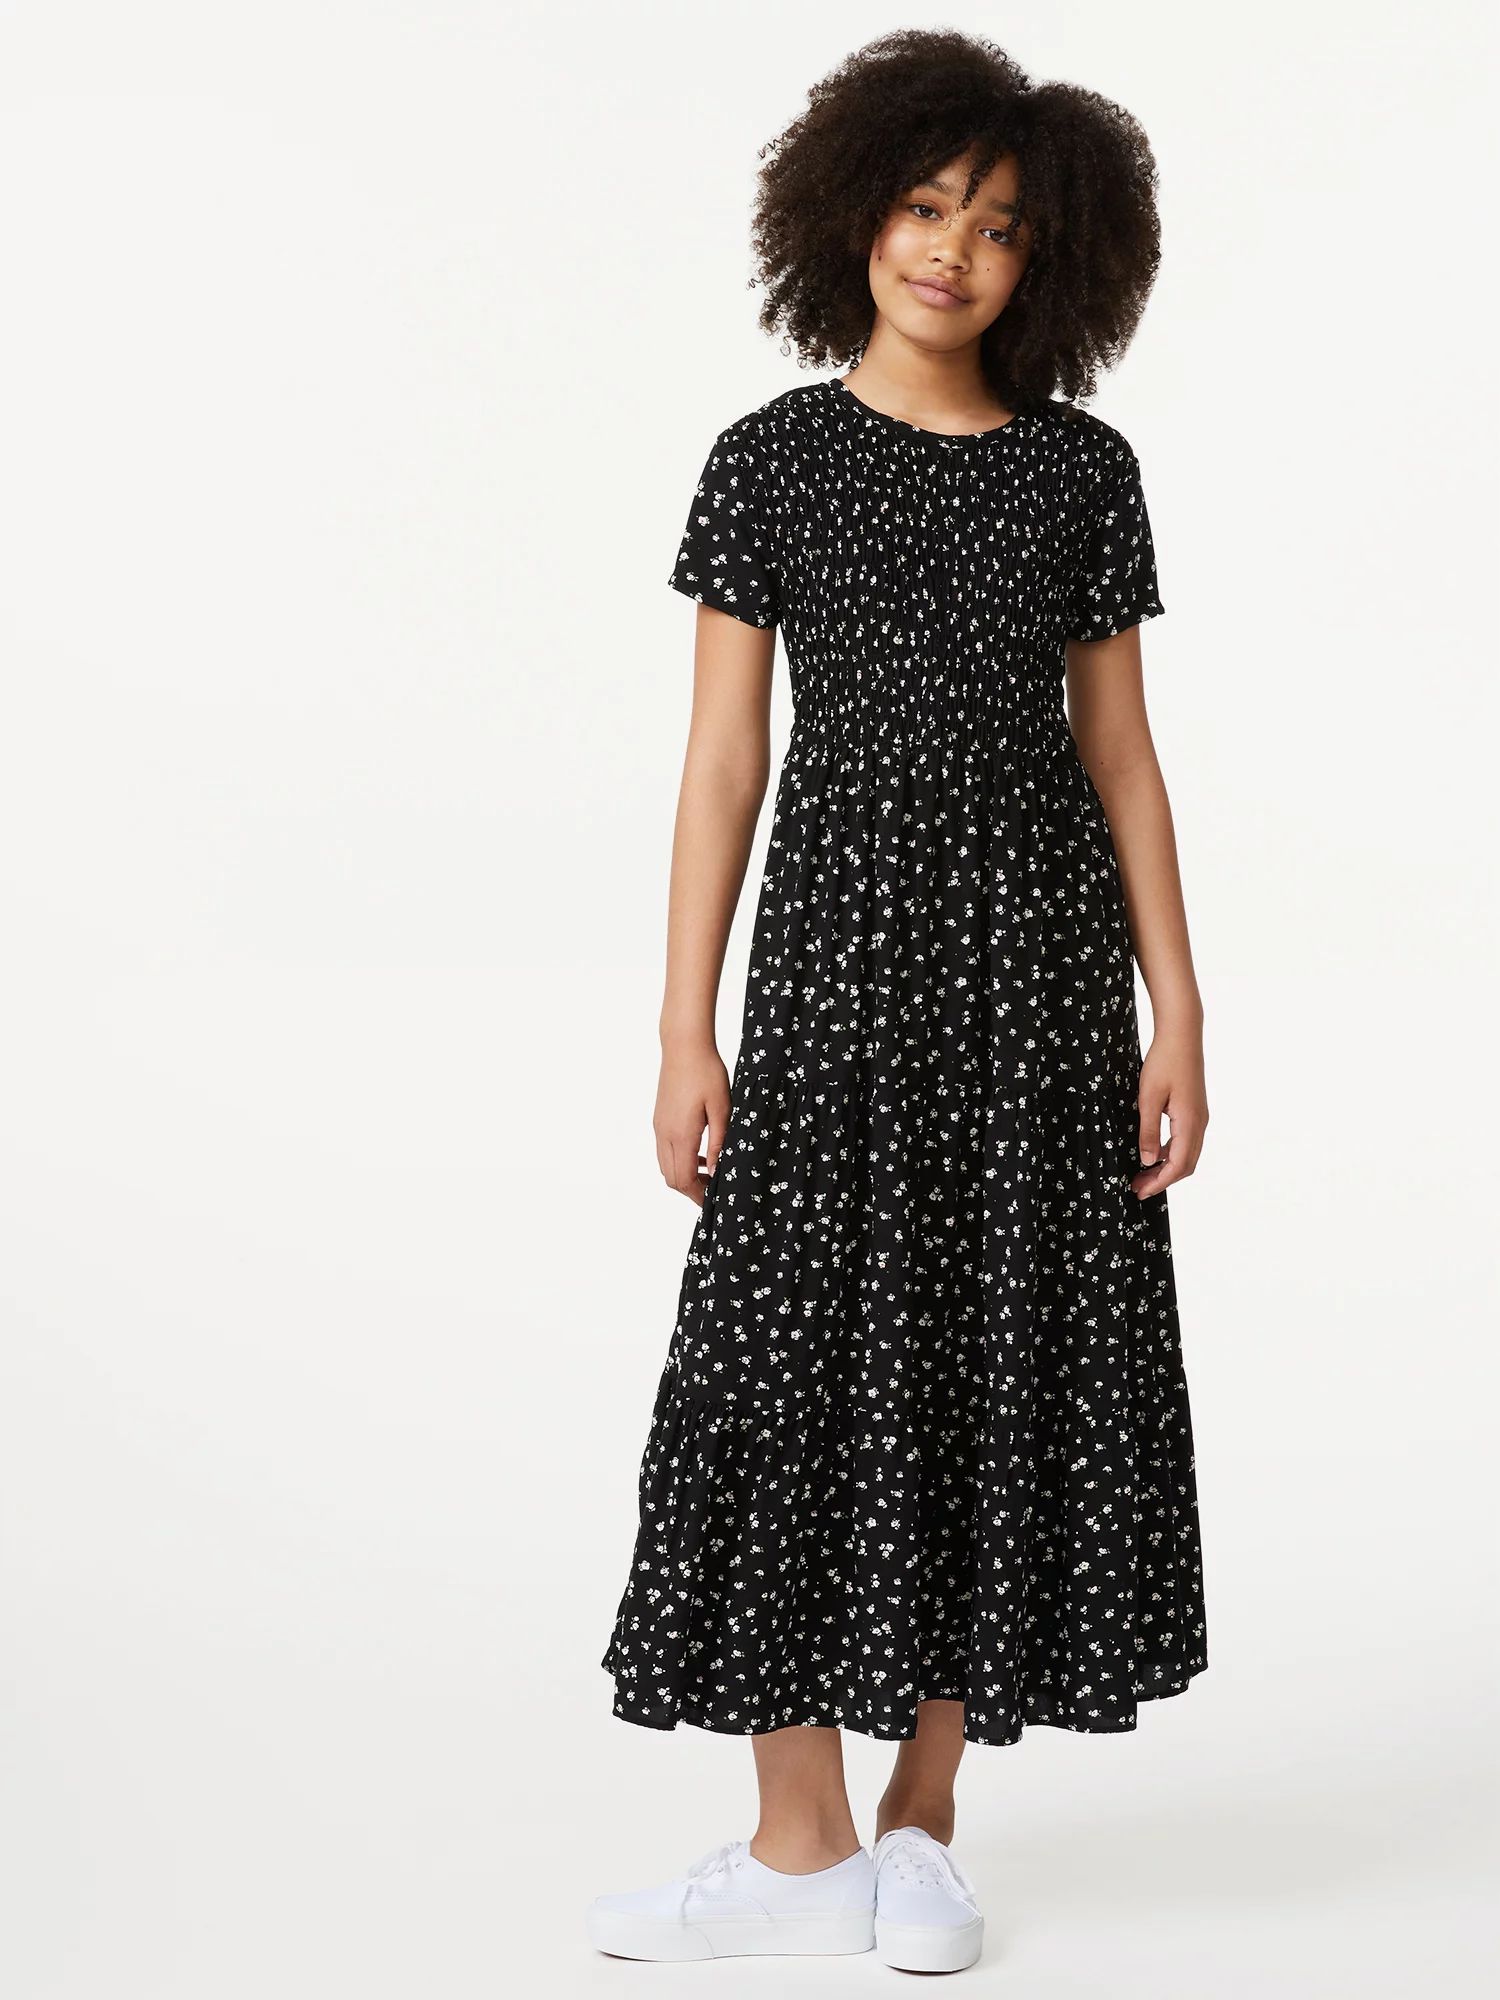 Free Assembly Girls Tiered Maxi Dress with Short Sleeves, Sizes 4-18 | Walmart (US)